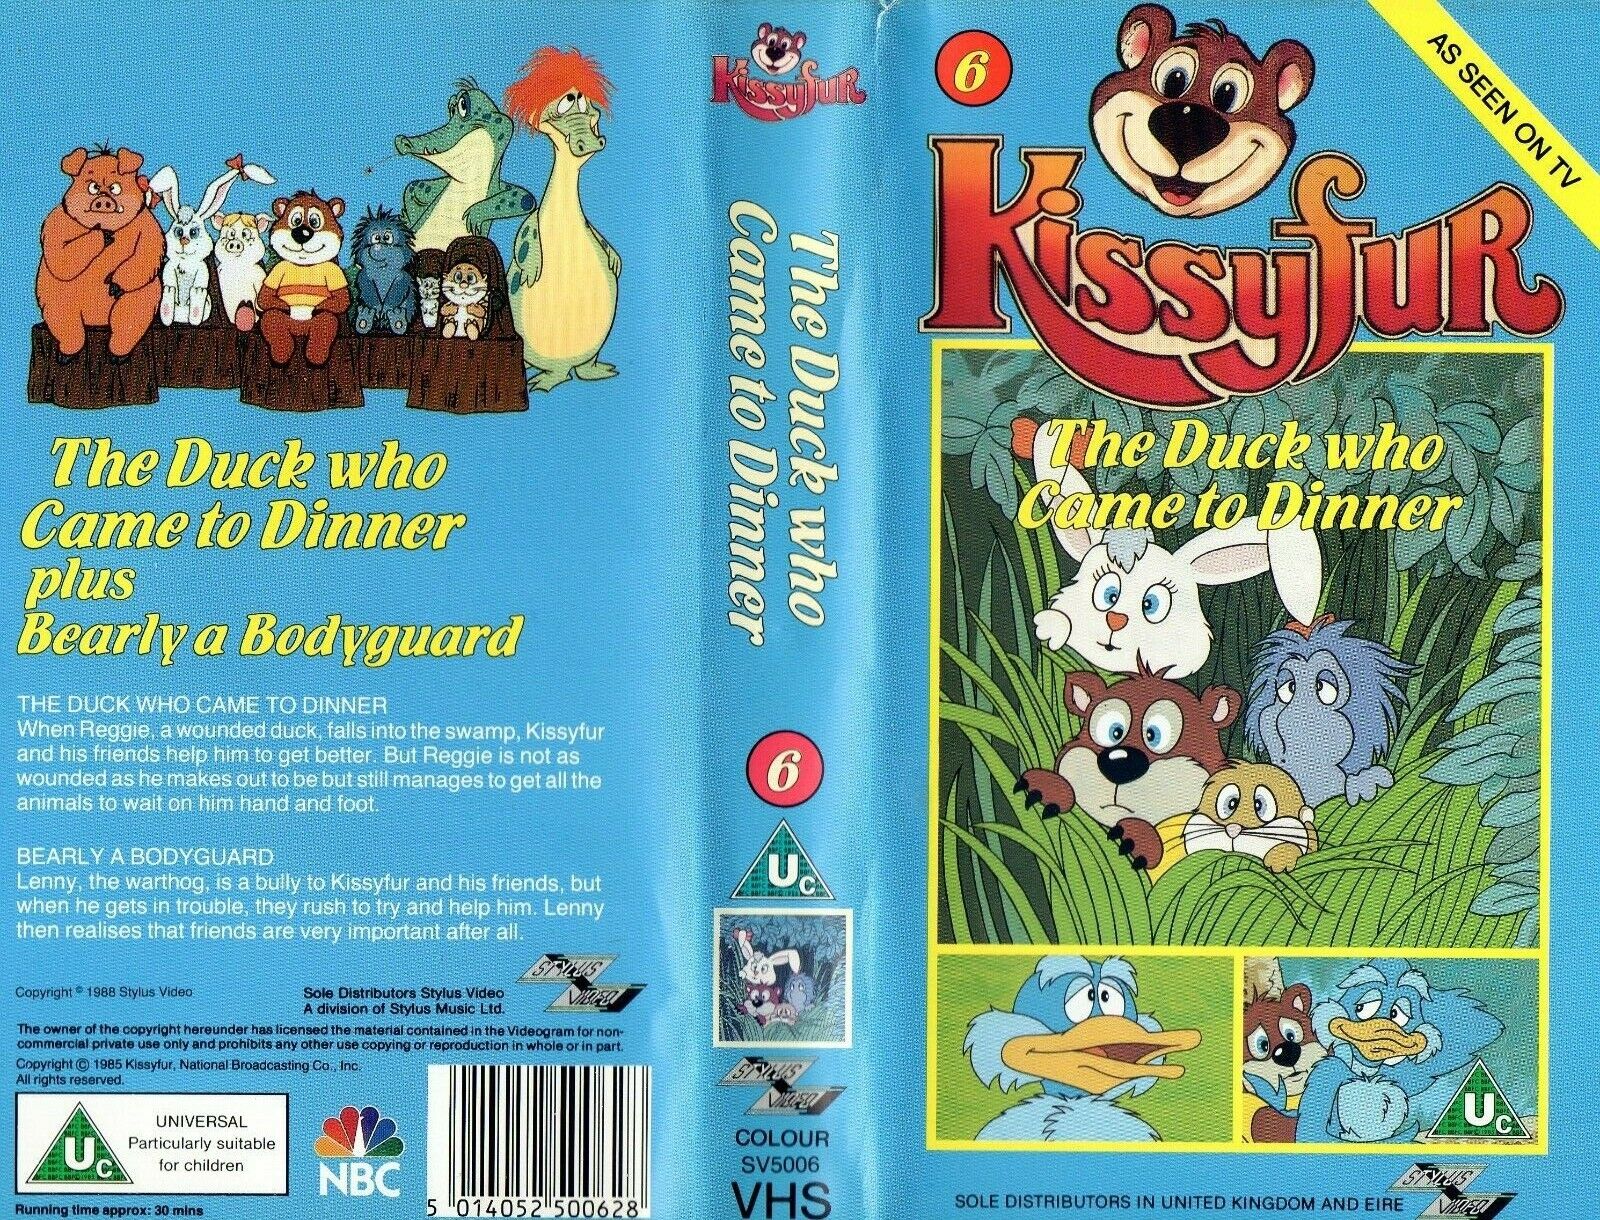 Kissyfur The Duck who came to Dinner [plus Bearly a Bodyguard] VHS PAL UK  Video. 5014052500628 | eBay